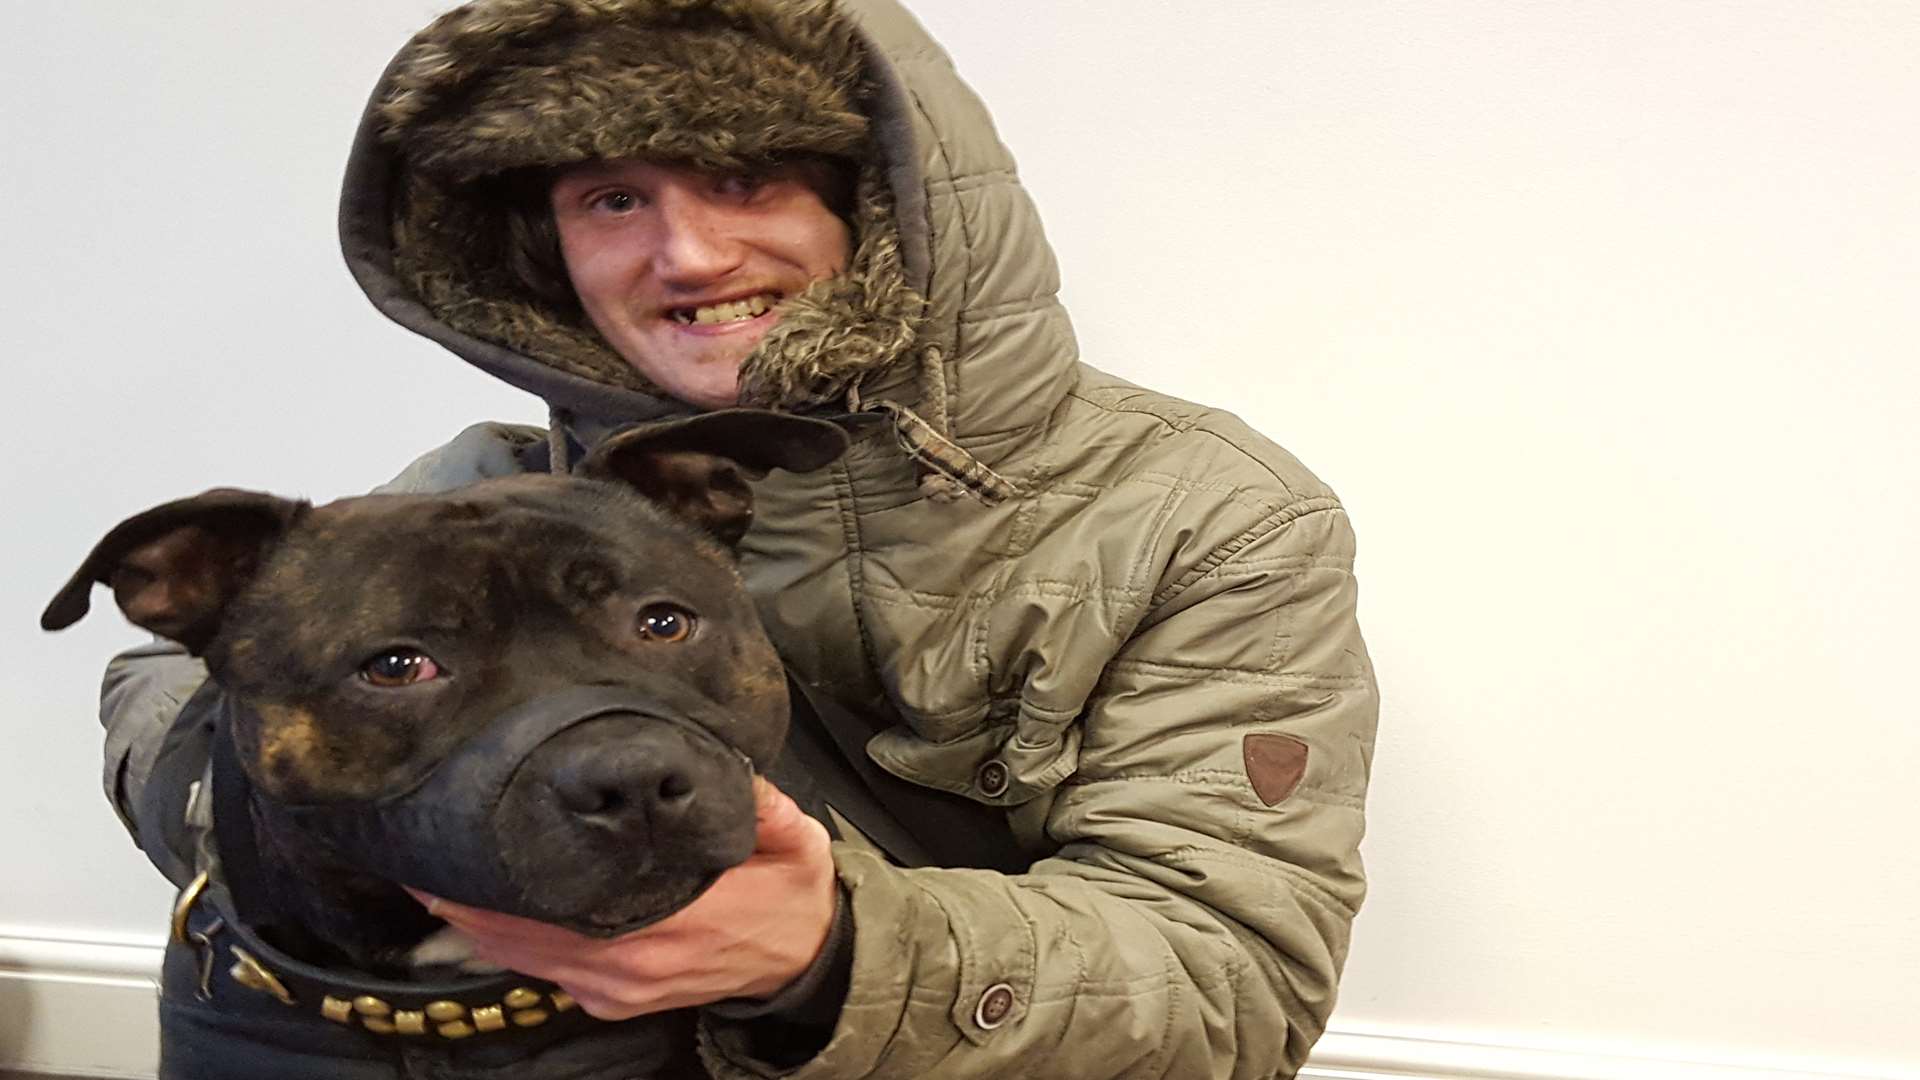 Leeroy and his dog Tyson are looking for a more permanent home